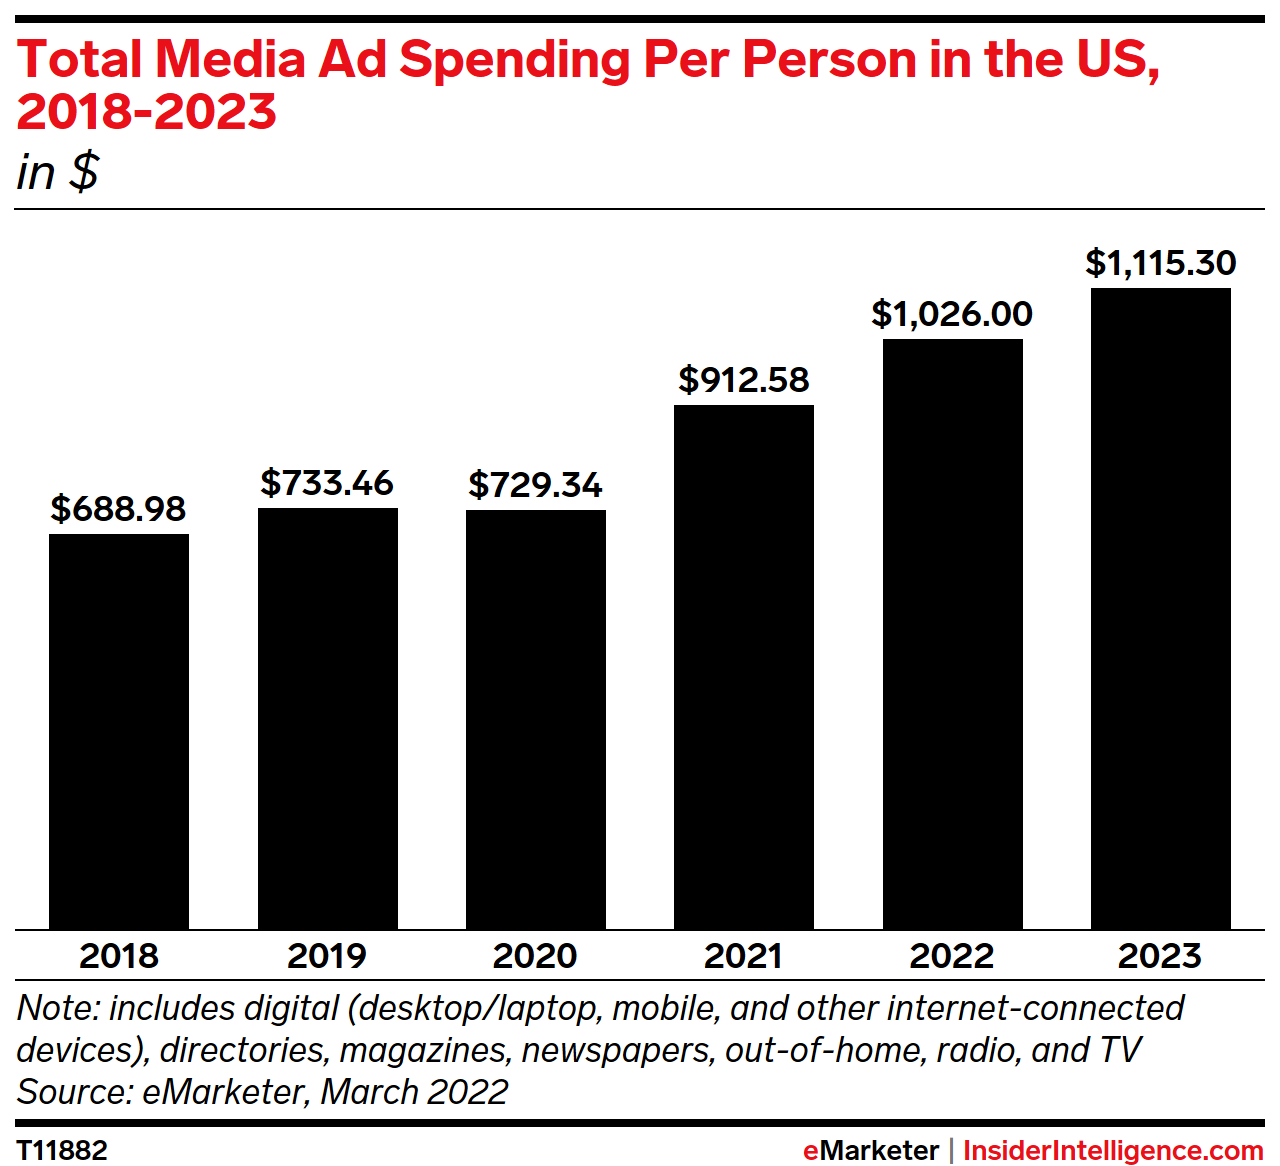 Total Media Ad Spending per Person in the US, 2018-2023